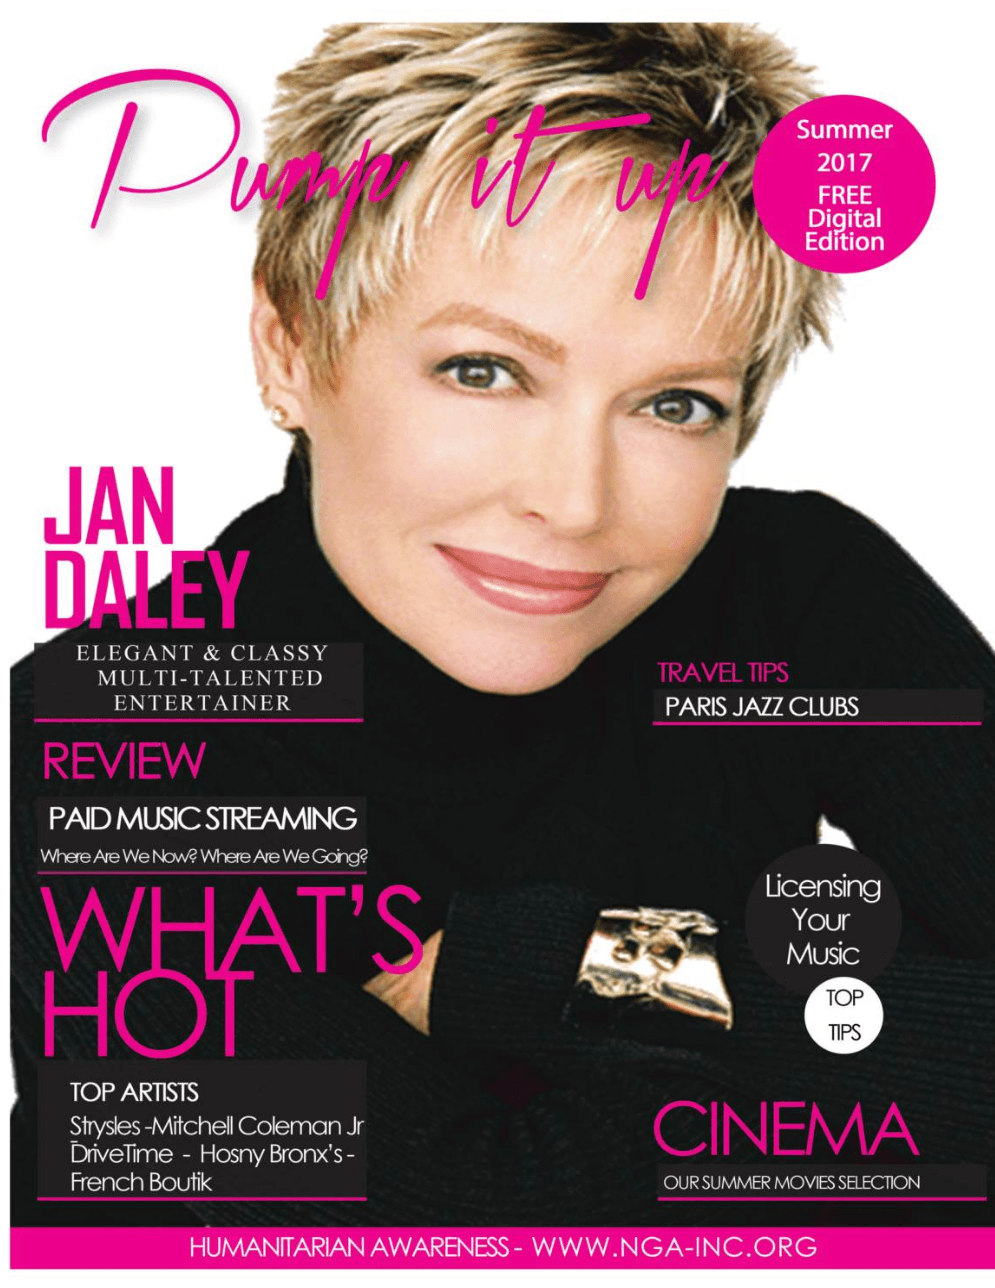 A magazine cover with a woman named jan daley on it